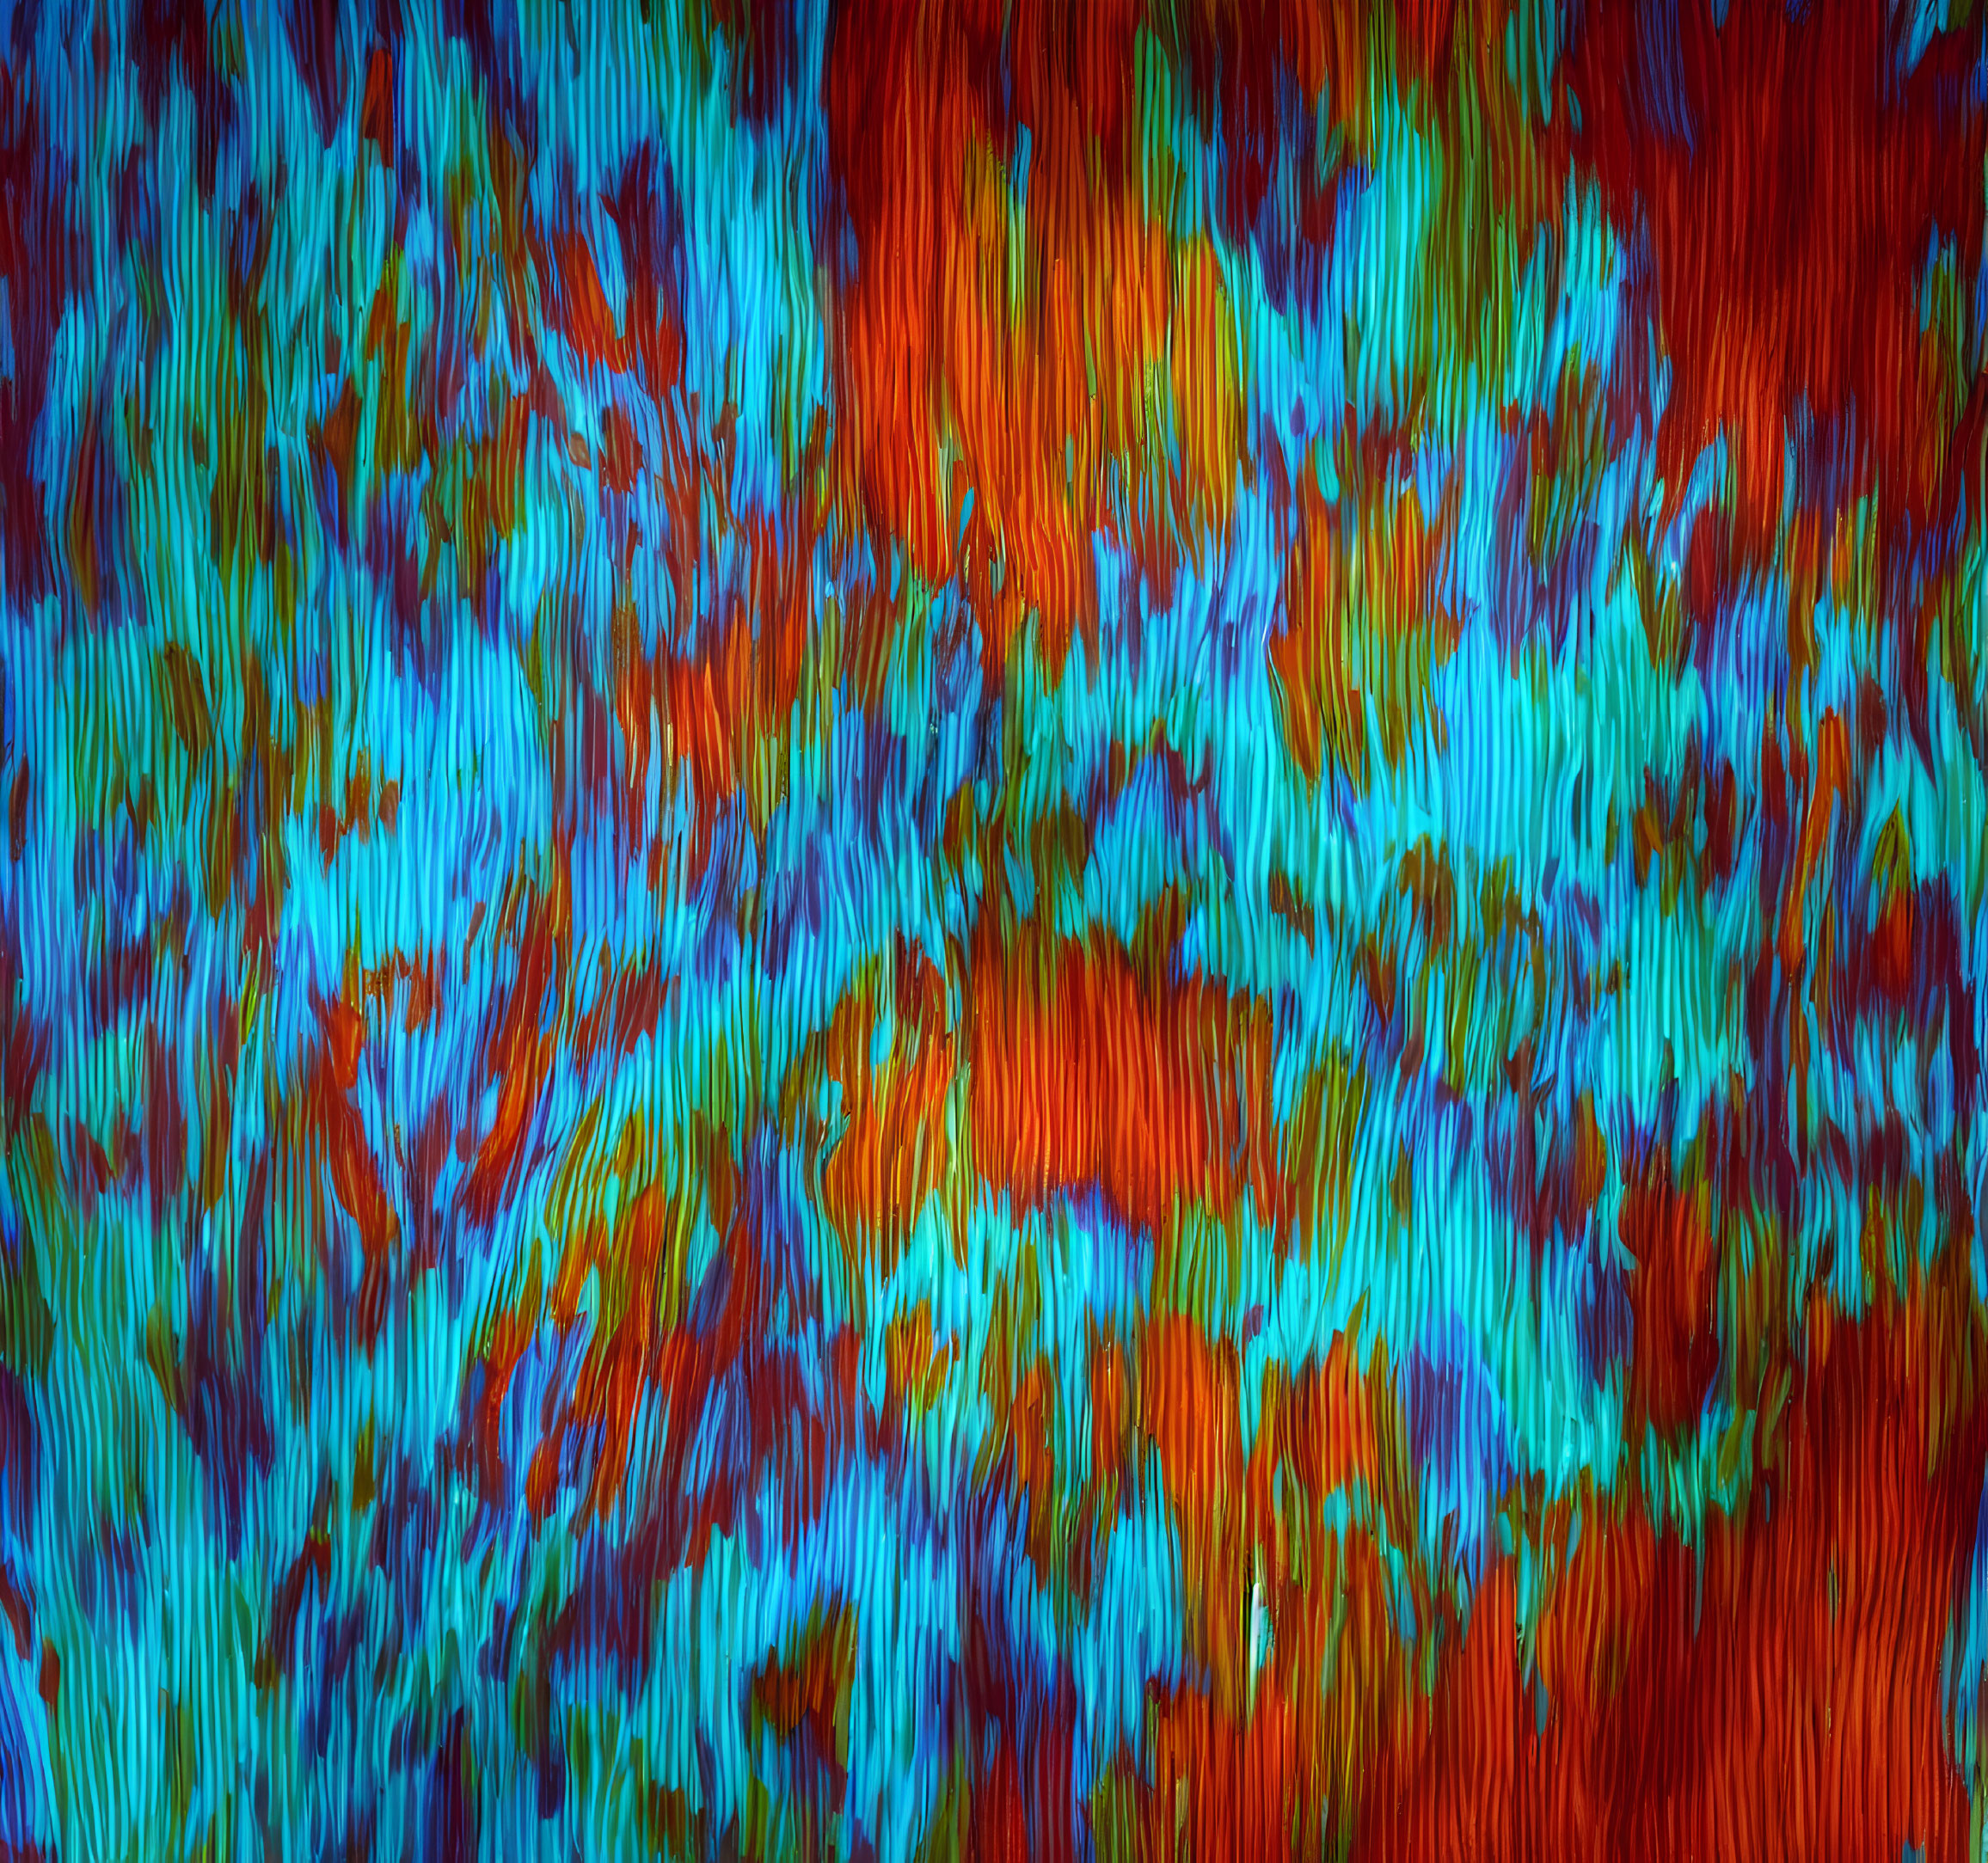 Dynamic Blue and Red Abstract Painting with Fiery Flow Effect